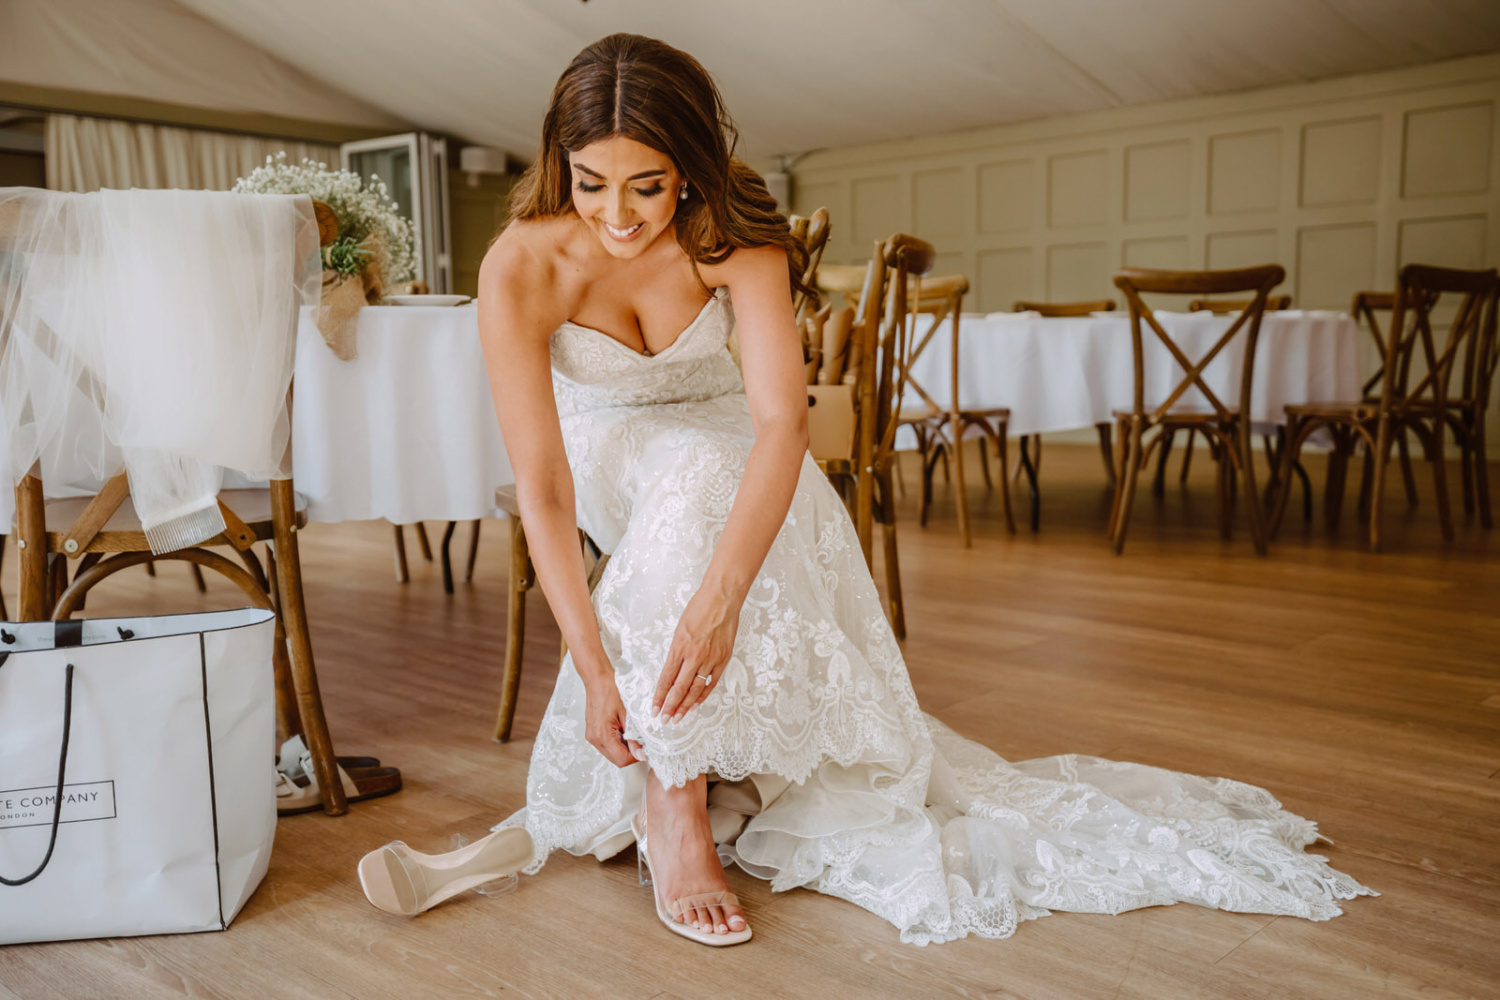 A bride putting on her wedding shoes.